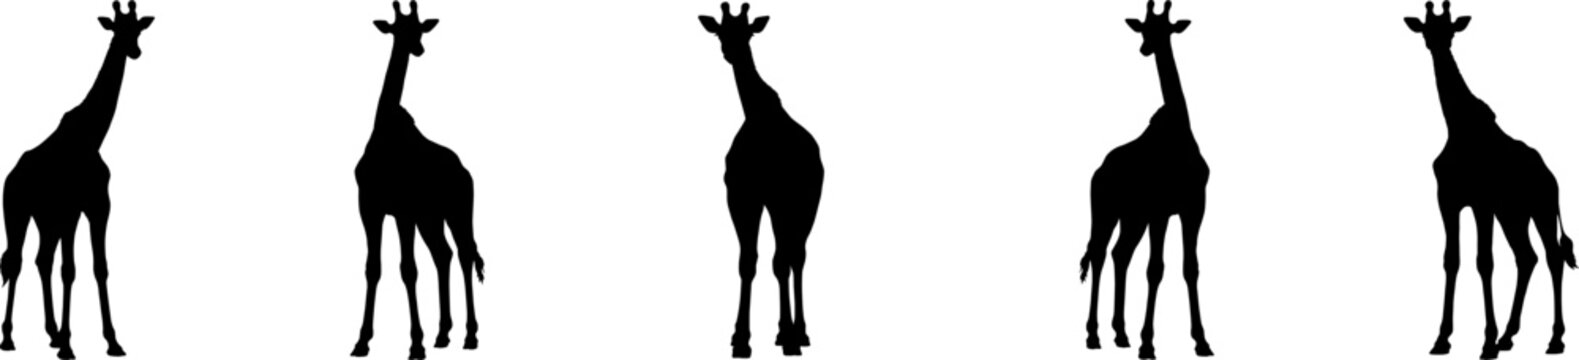 Set of vector silhouettes of giraffes